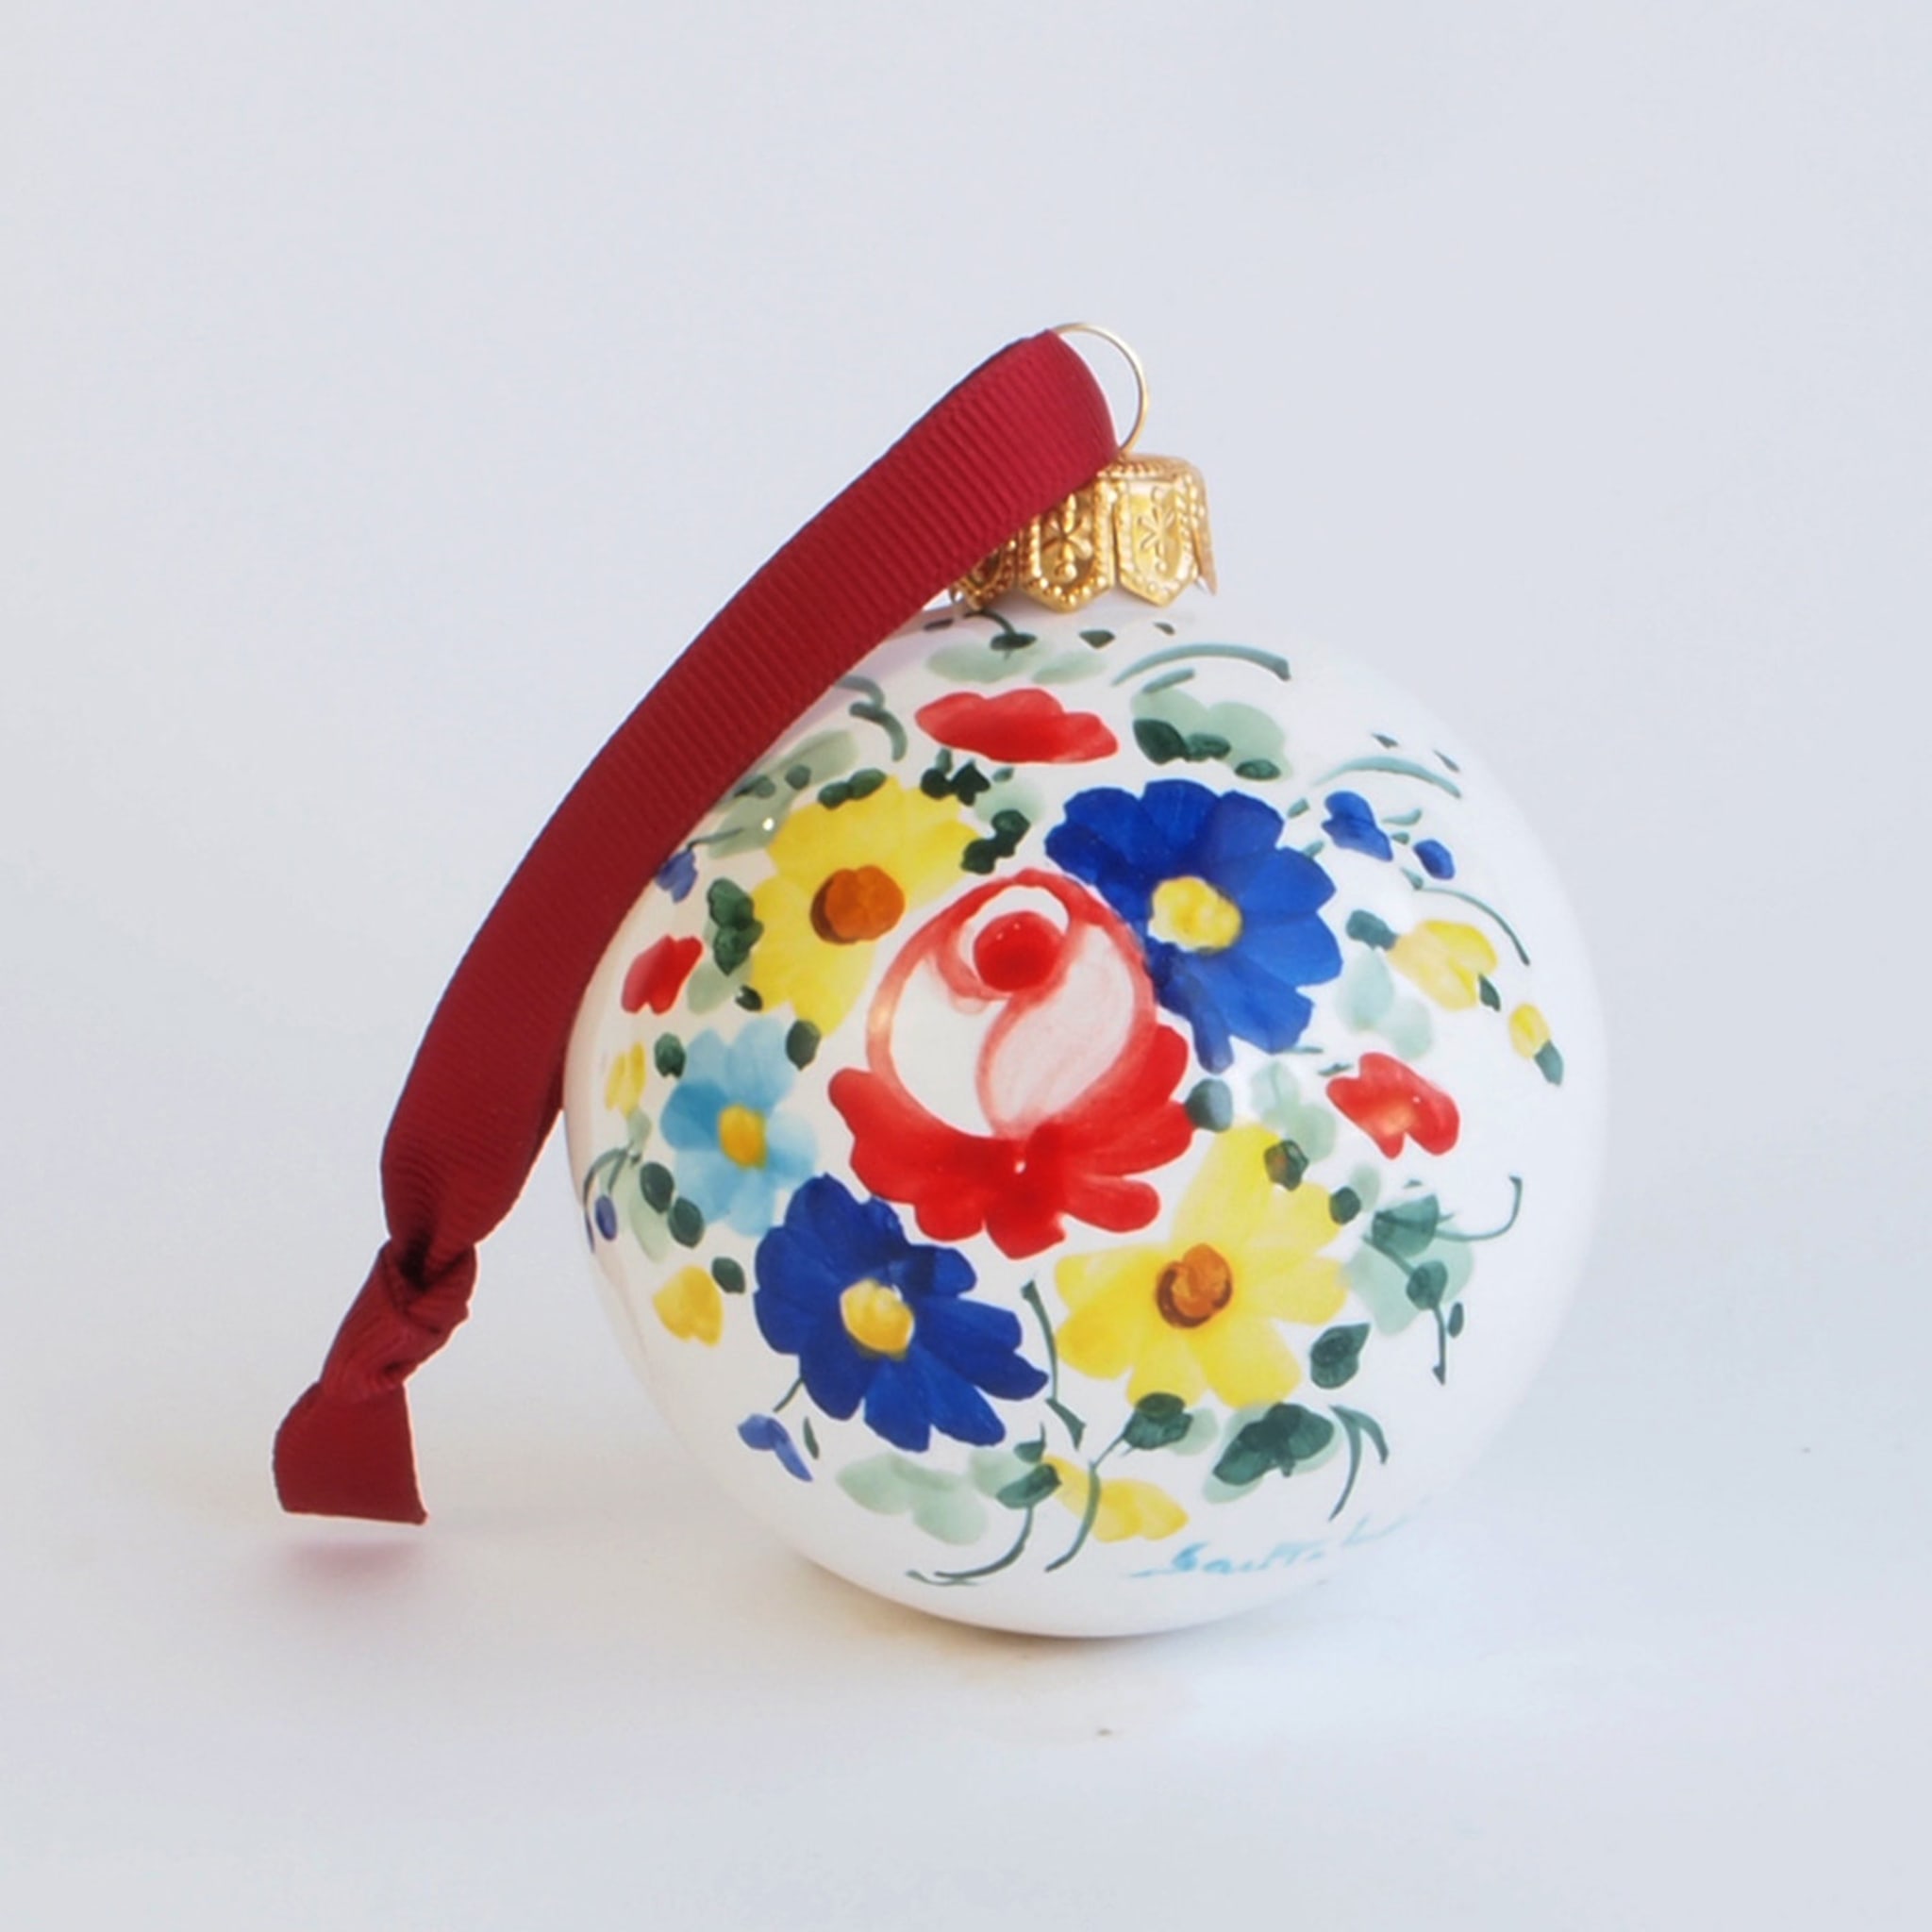 Multicolor Floral Christmas Ball Ornament #1 - Alternative view 1